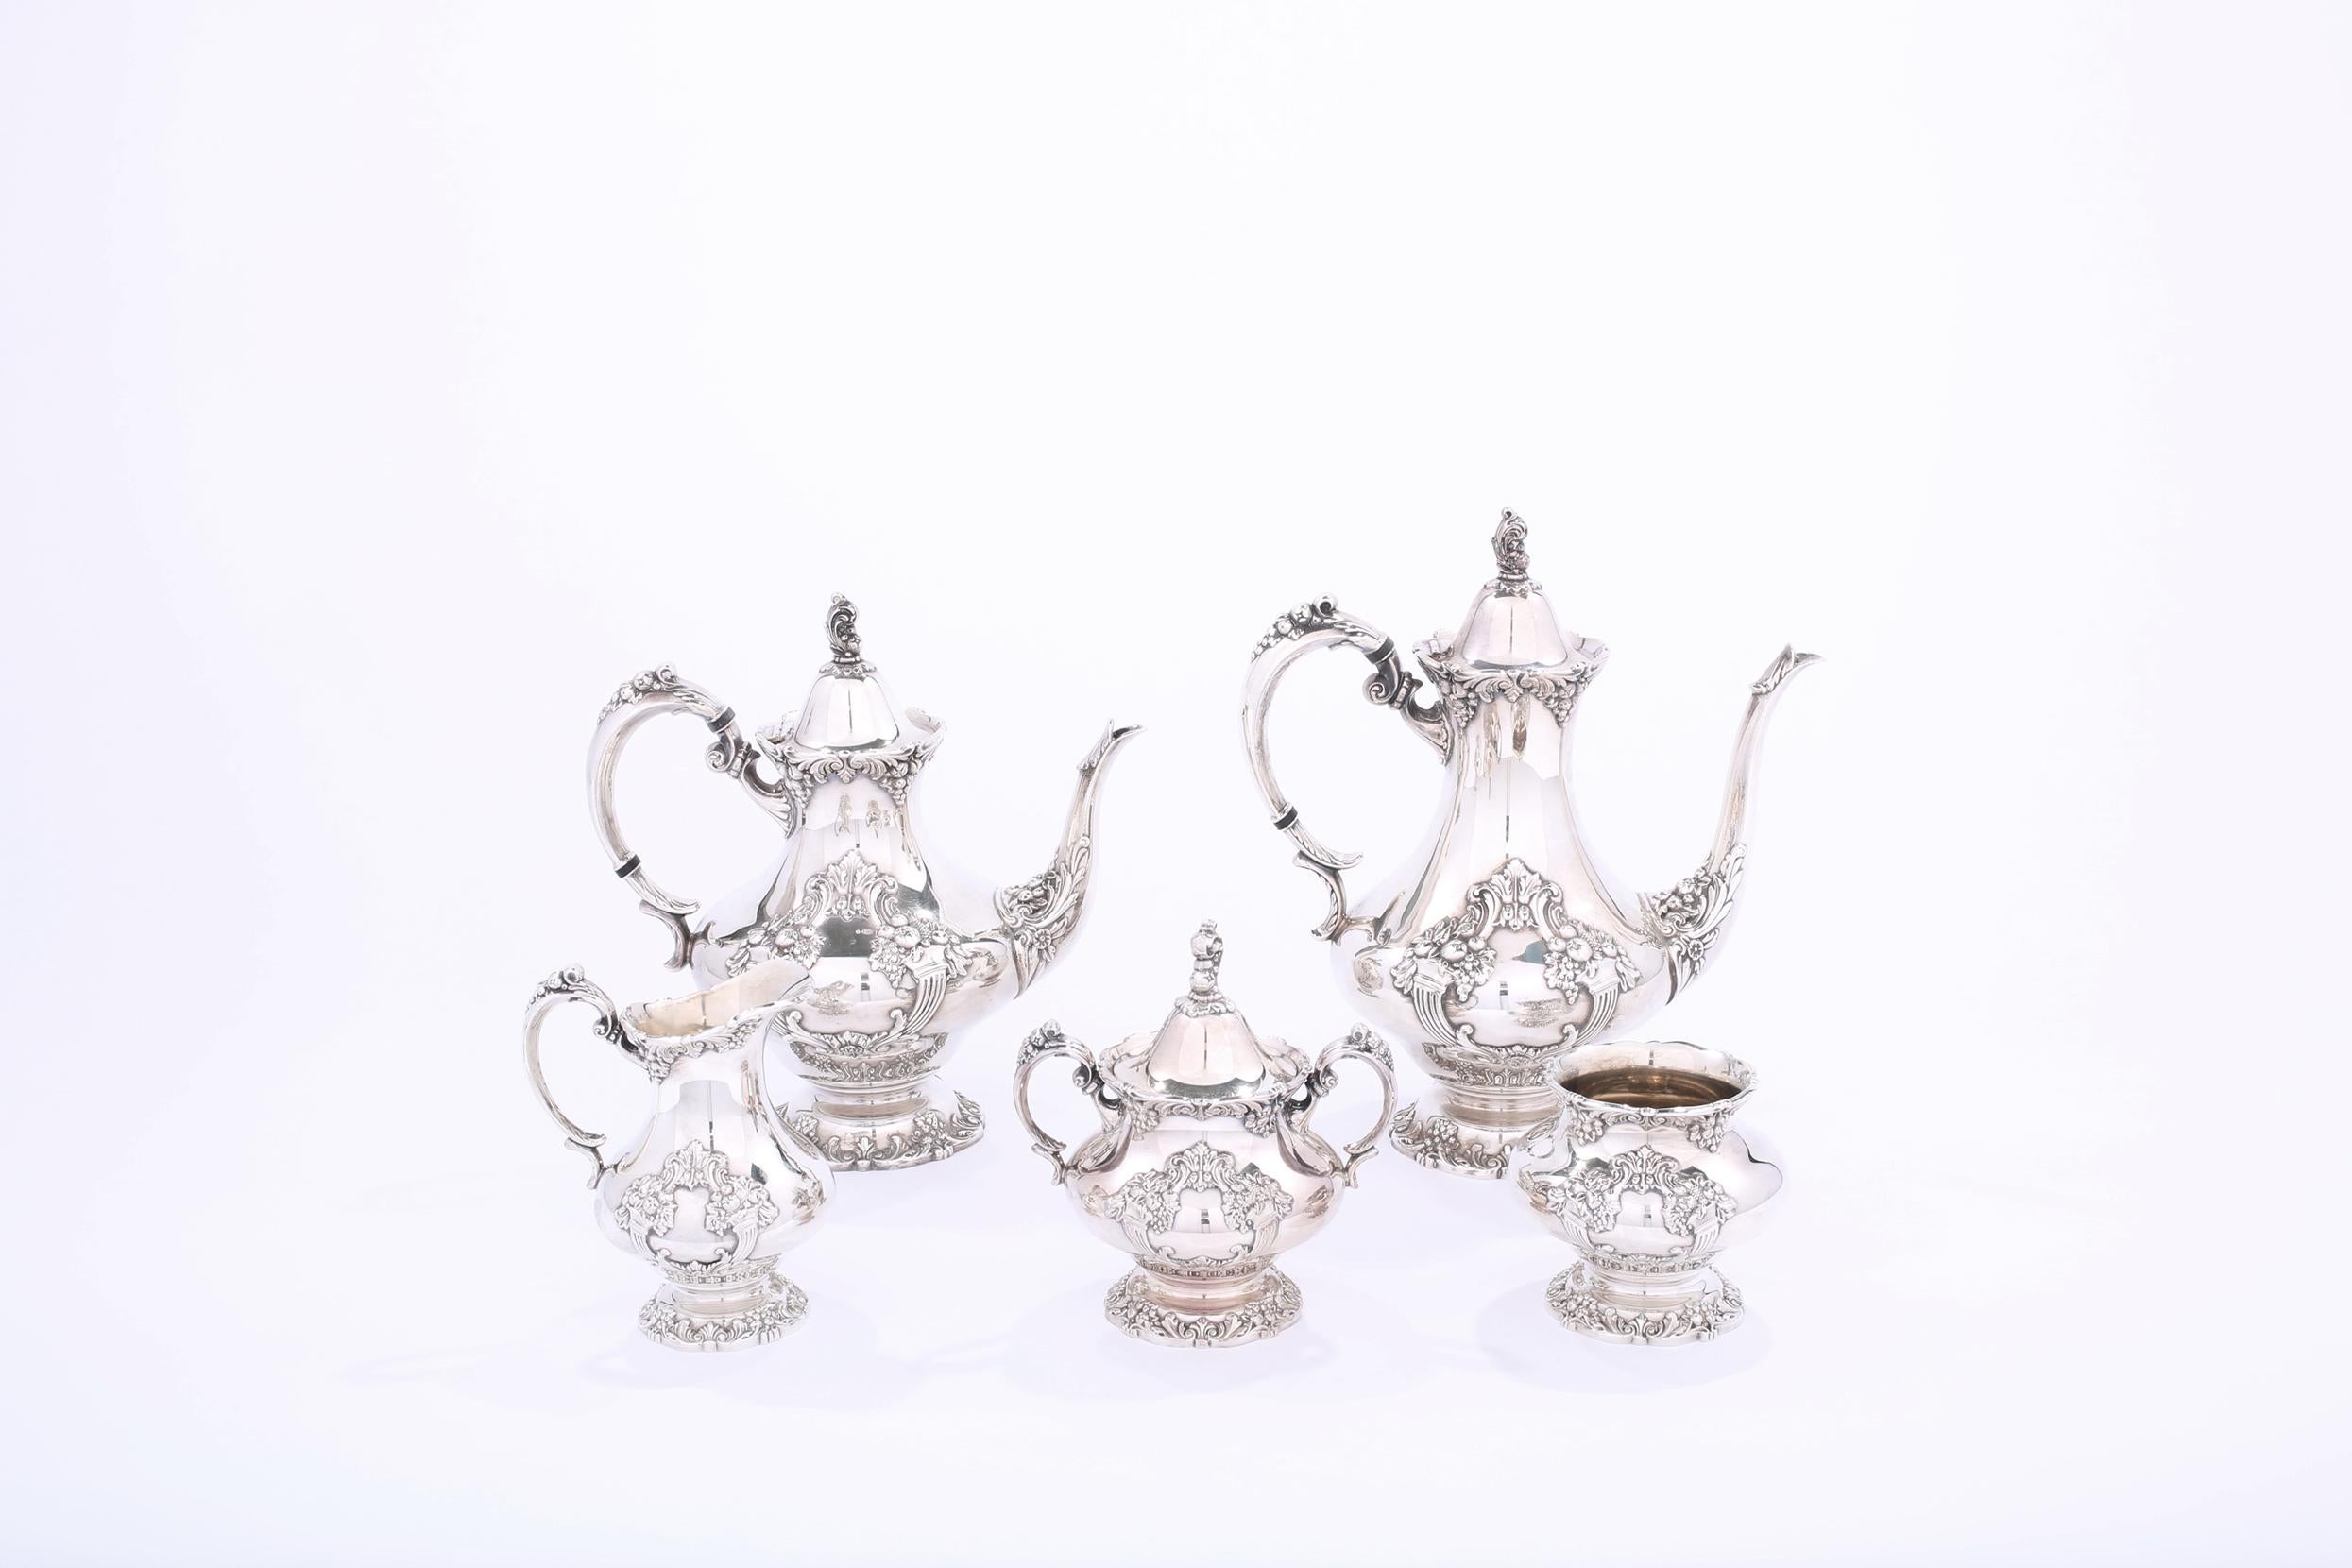 Silver plated five pieces tea and coffee service with exterior floral design details. Each piece is in great condition. Minor wear consistent with age / use. Maker's mark undersigned Reed & Barton 